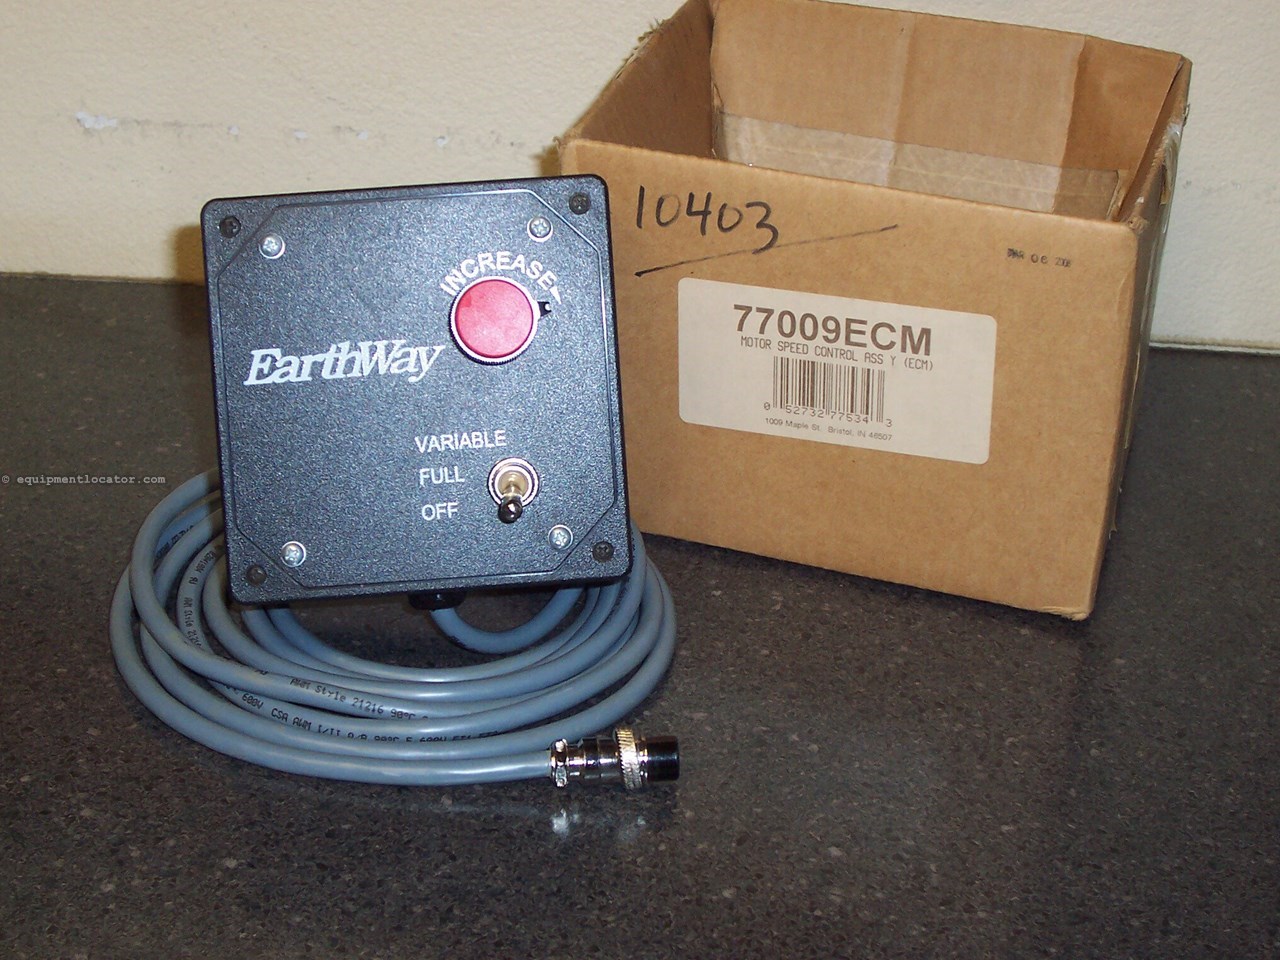 Earthway 77009 speed control